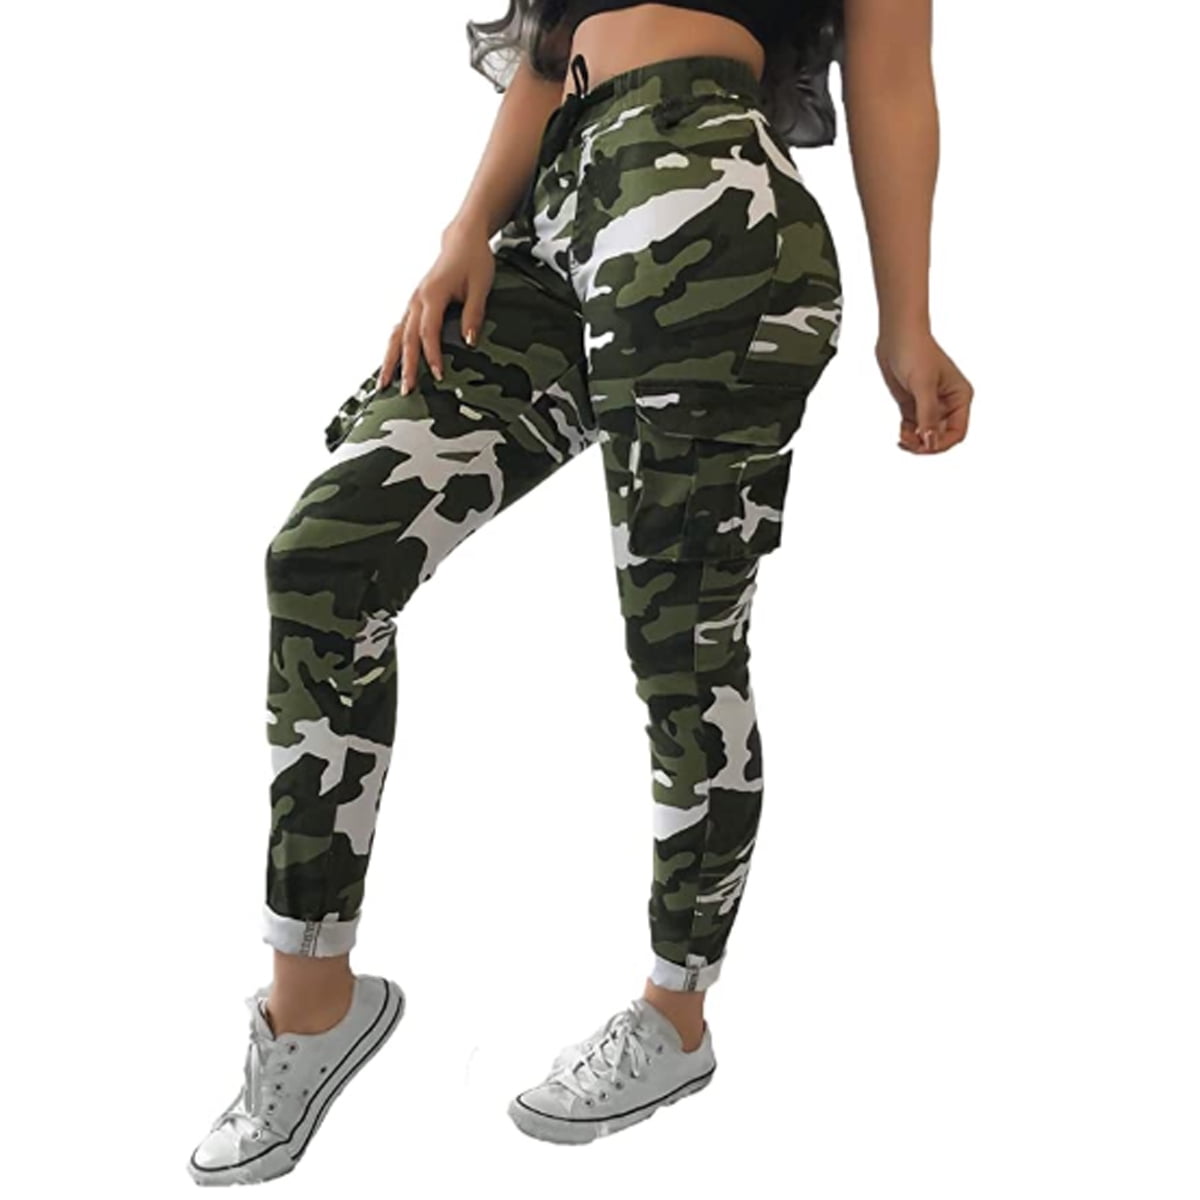 Benficial Womens Sports Camouflage Sweatpants Casual Camouflage Trousers Jeans 2019 Summer 